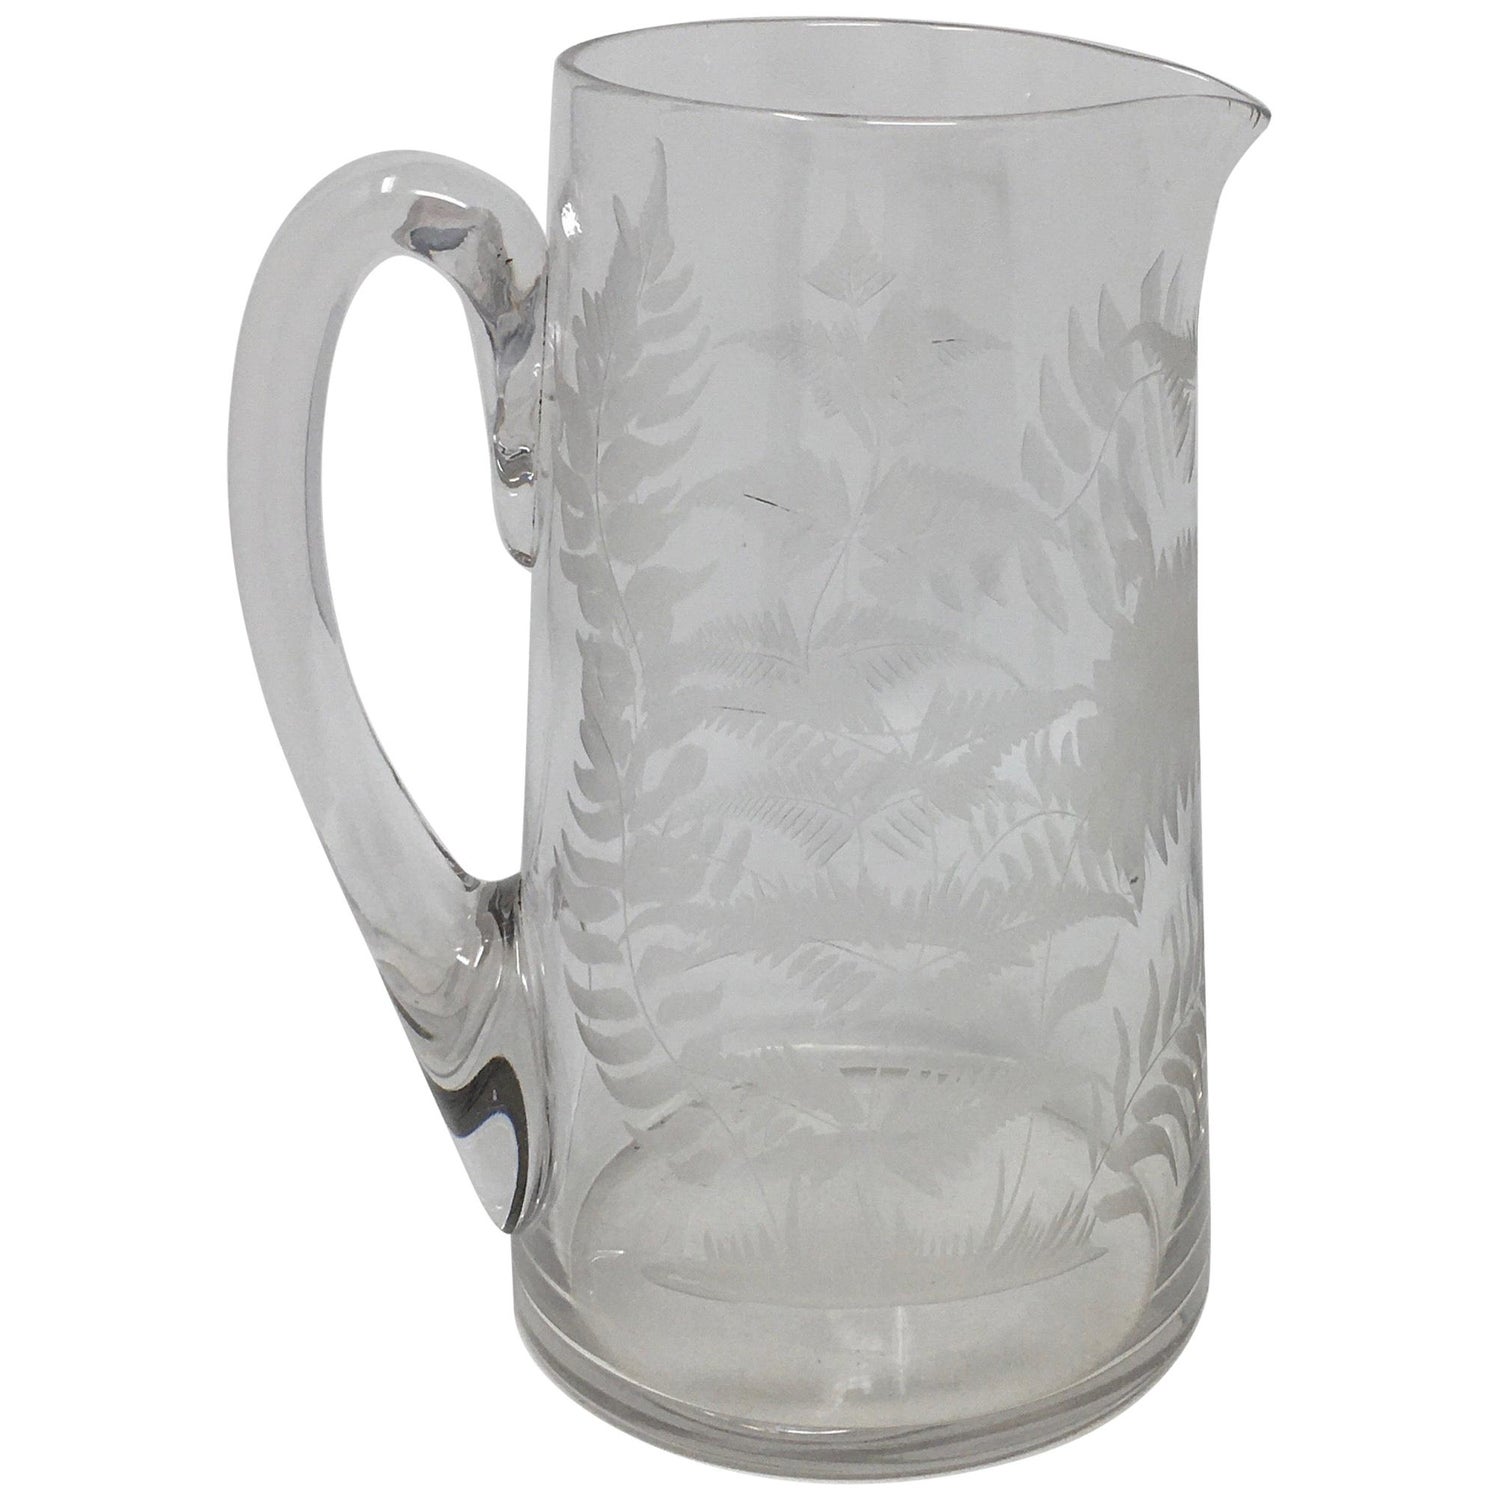 https://a.1stdibscdn.com/19th-century-english-etched-glass-pitcher-for-sale/1121189/f_200228321596268014294/20022832_master.jpg?width=1500